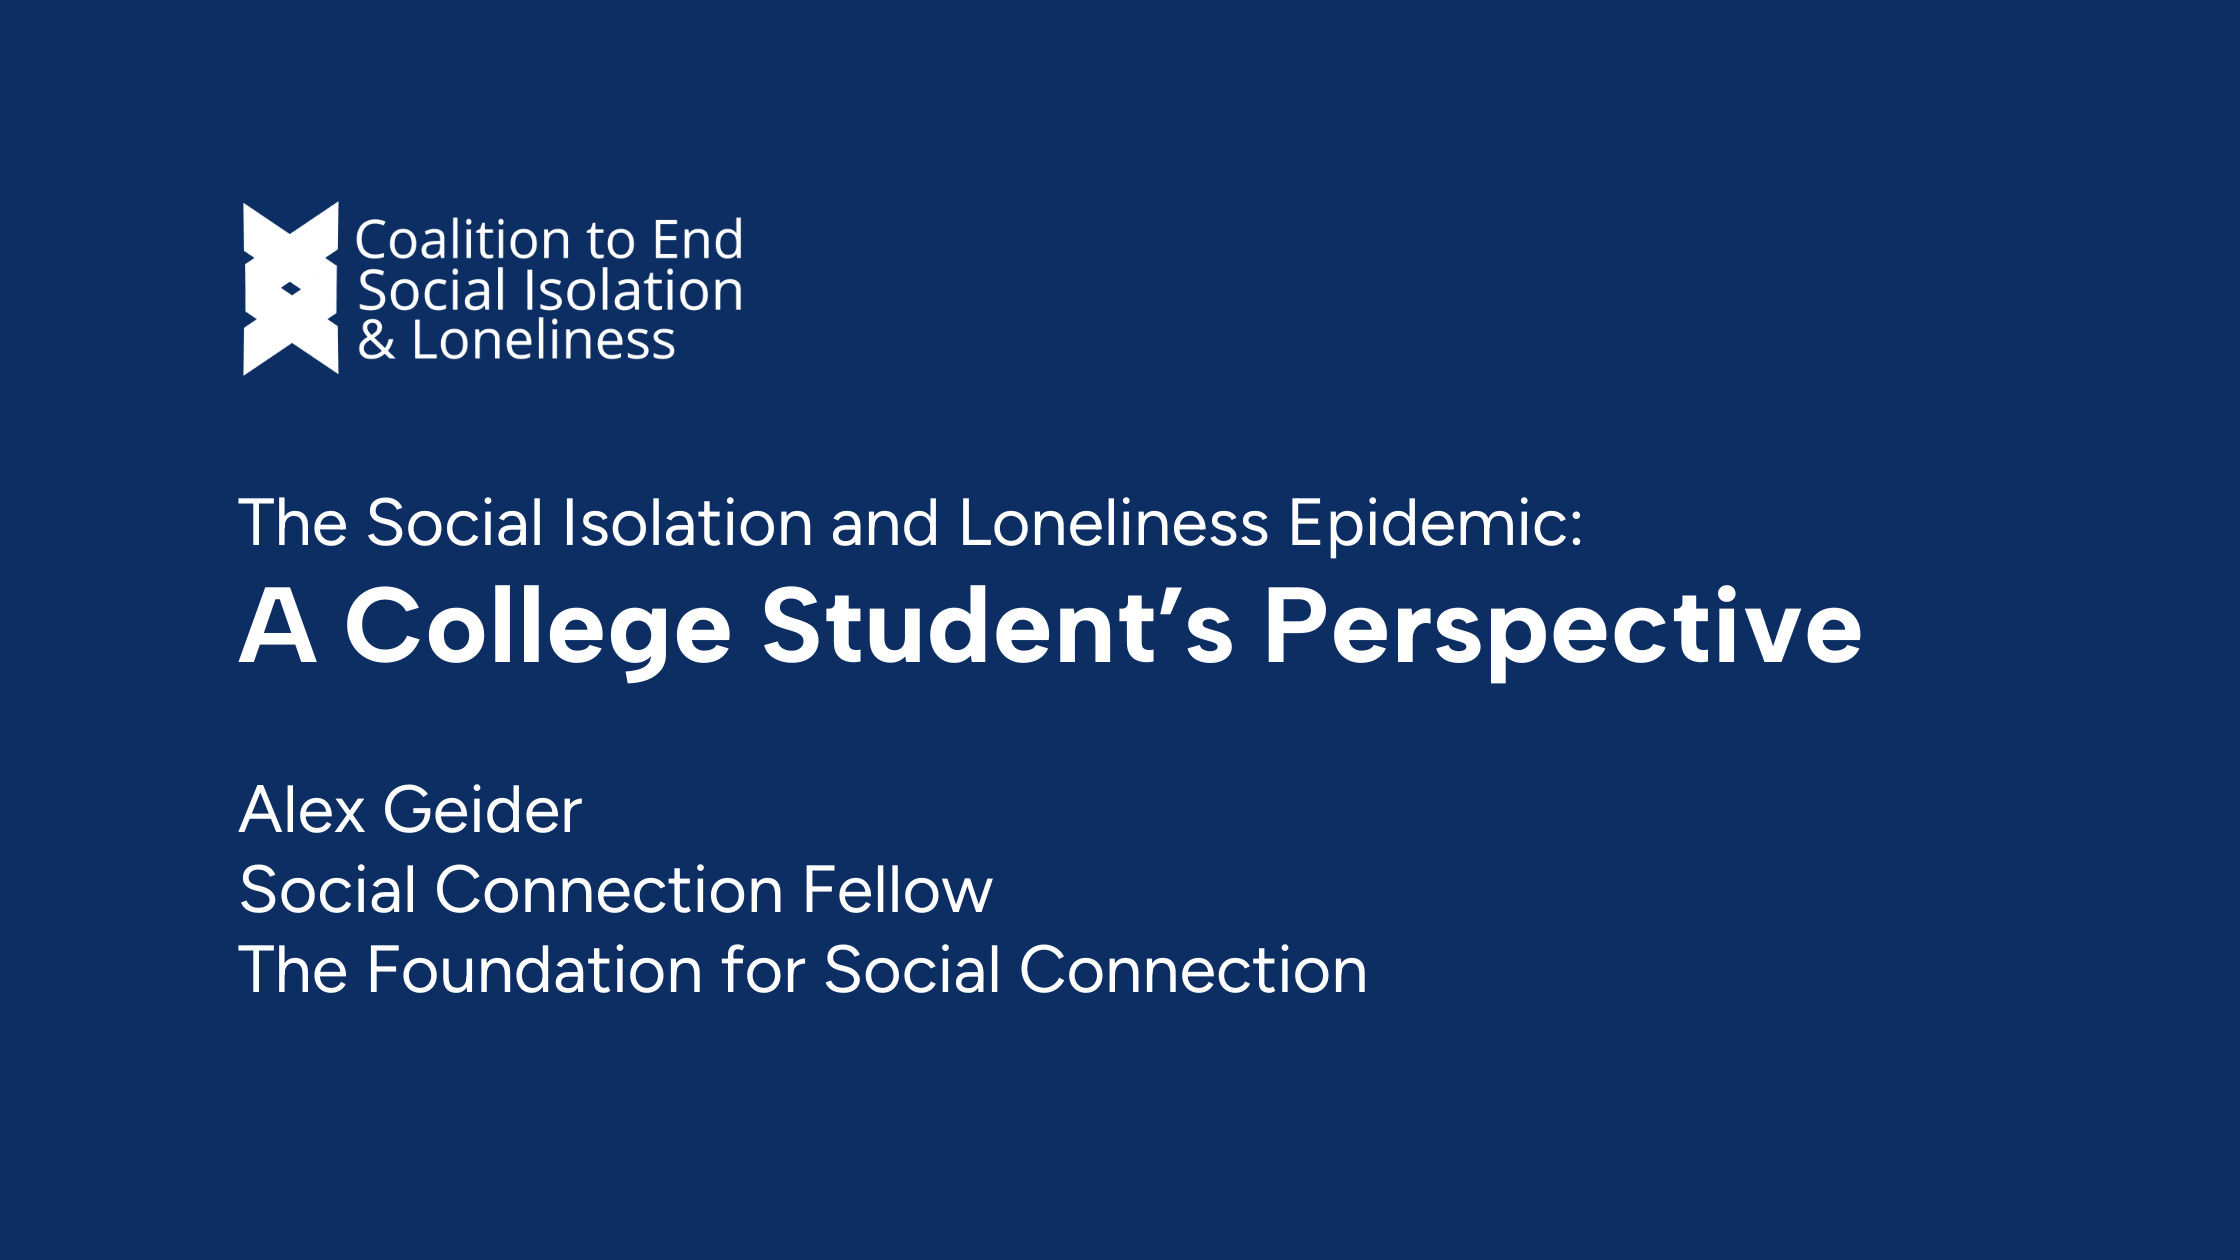 The Social Isolation and Loneliness Epidemic: A College Student’s Perspective